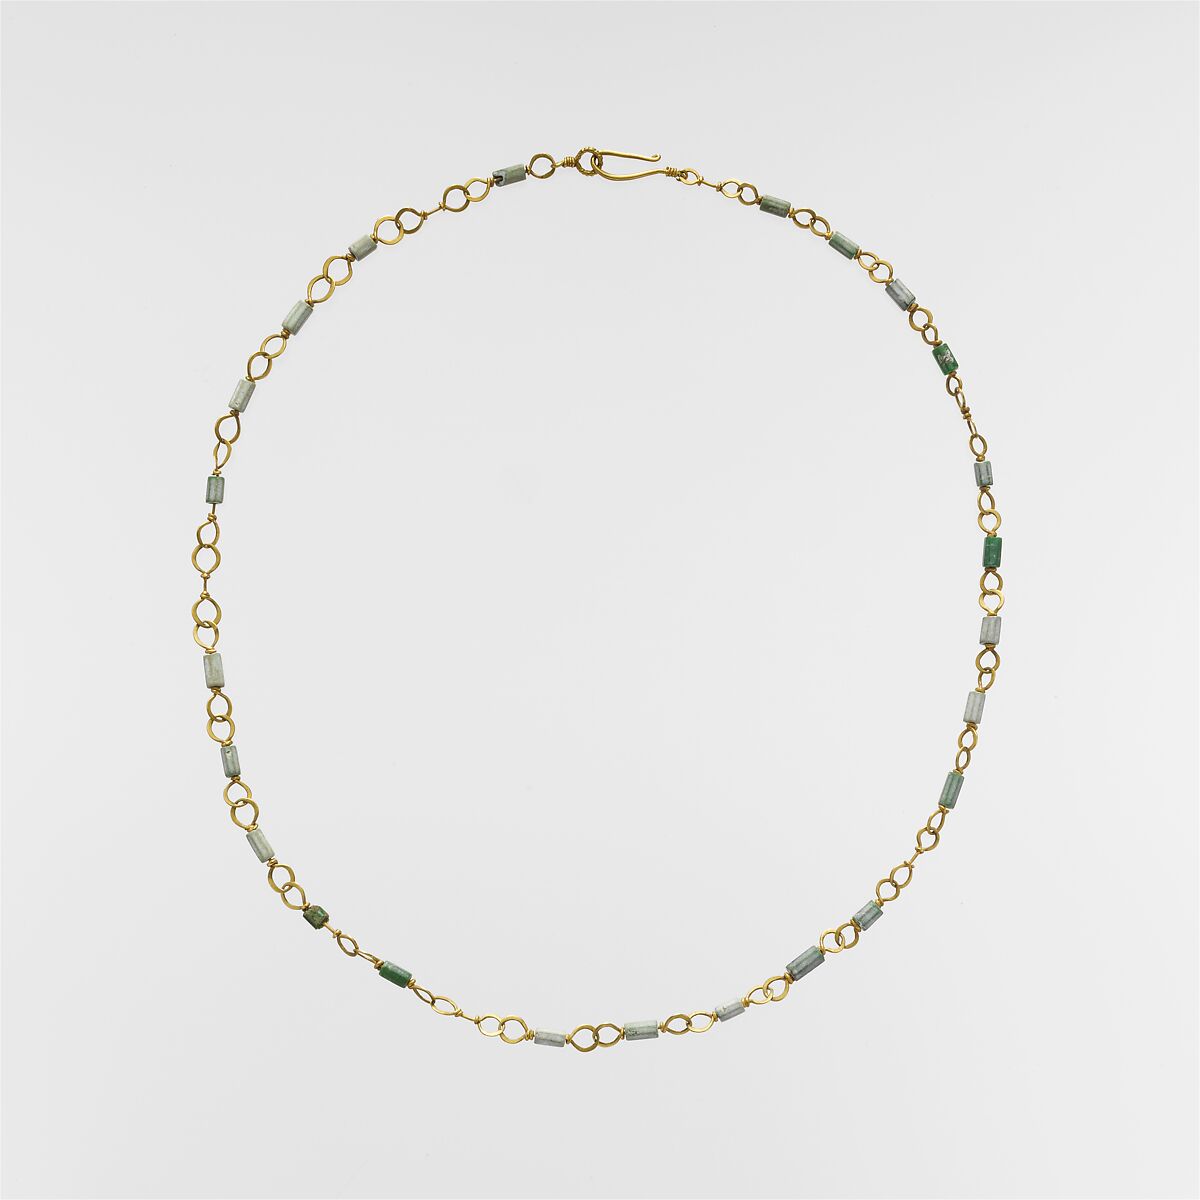 Gold necklace with emerald and variscite beads, Gold, emerald, and variscite, Roman